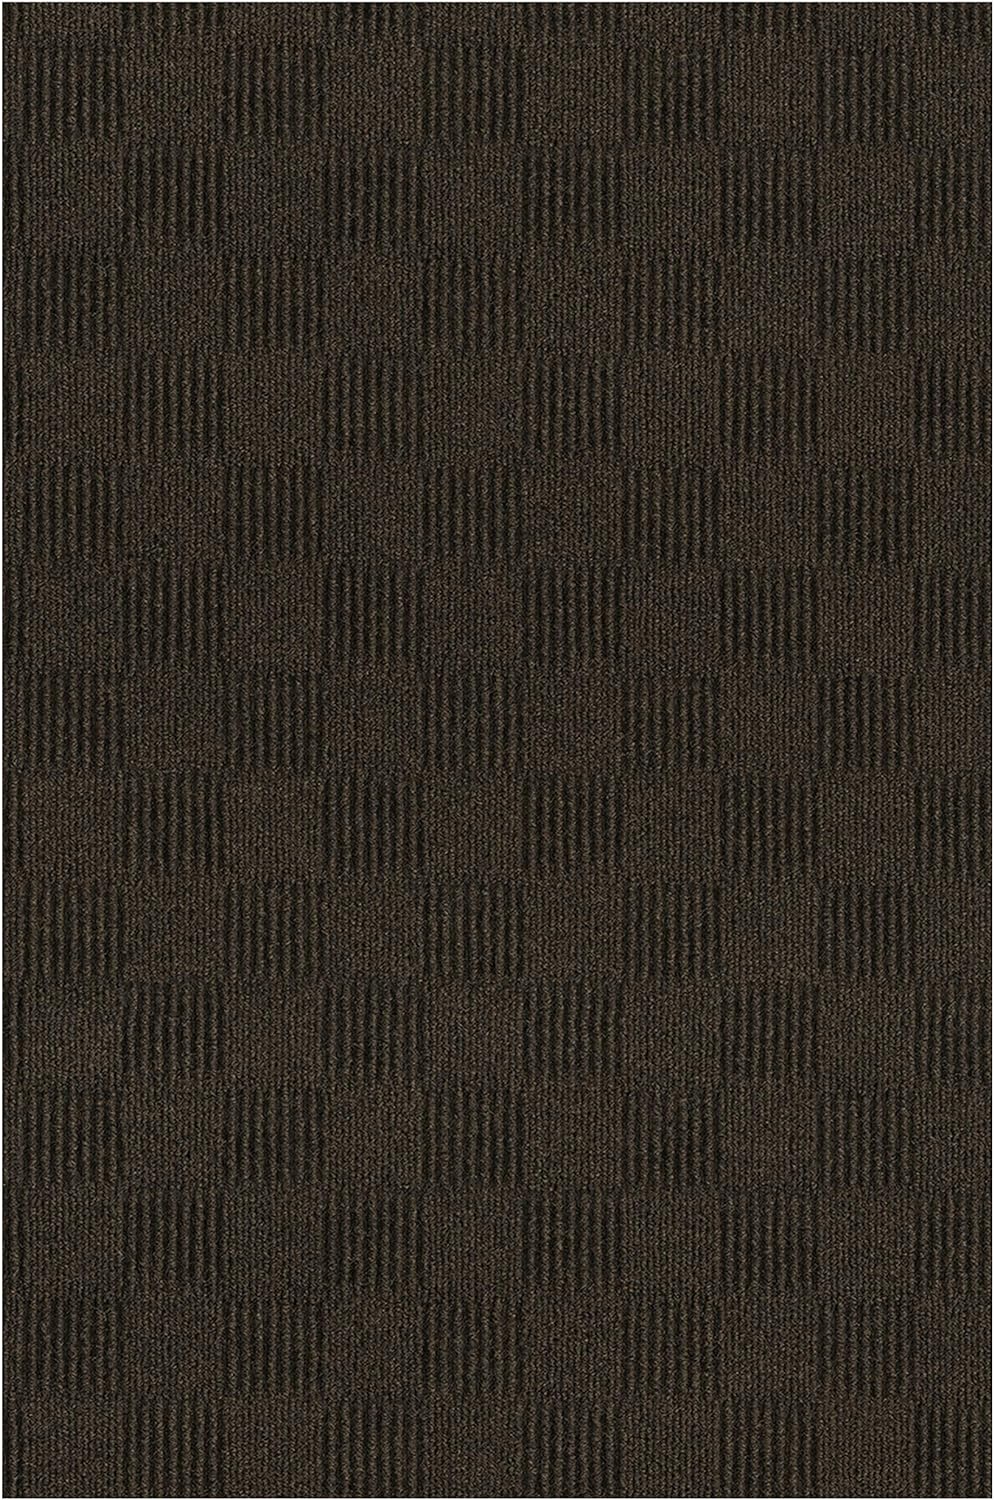 Koeckritz Rugs Soft and Durable Patchwork Style Indoor - Outdoor Area Rugs Lightweight and Flexible (Color: Mocha)